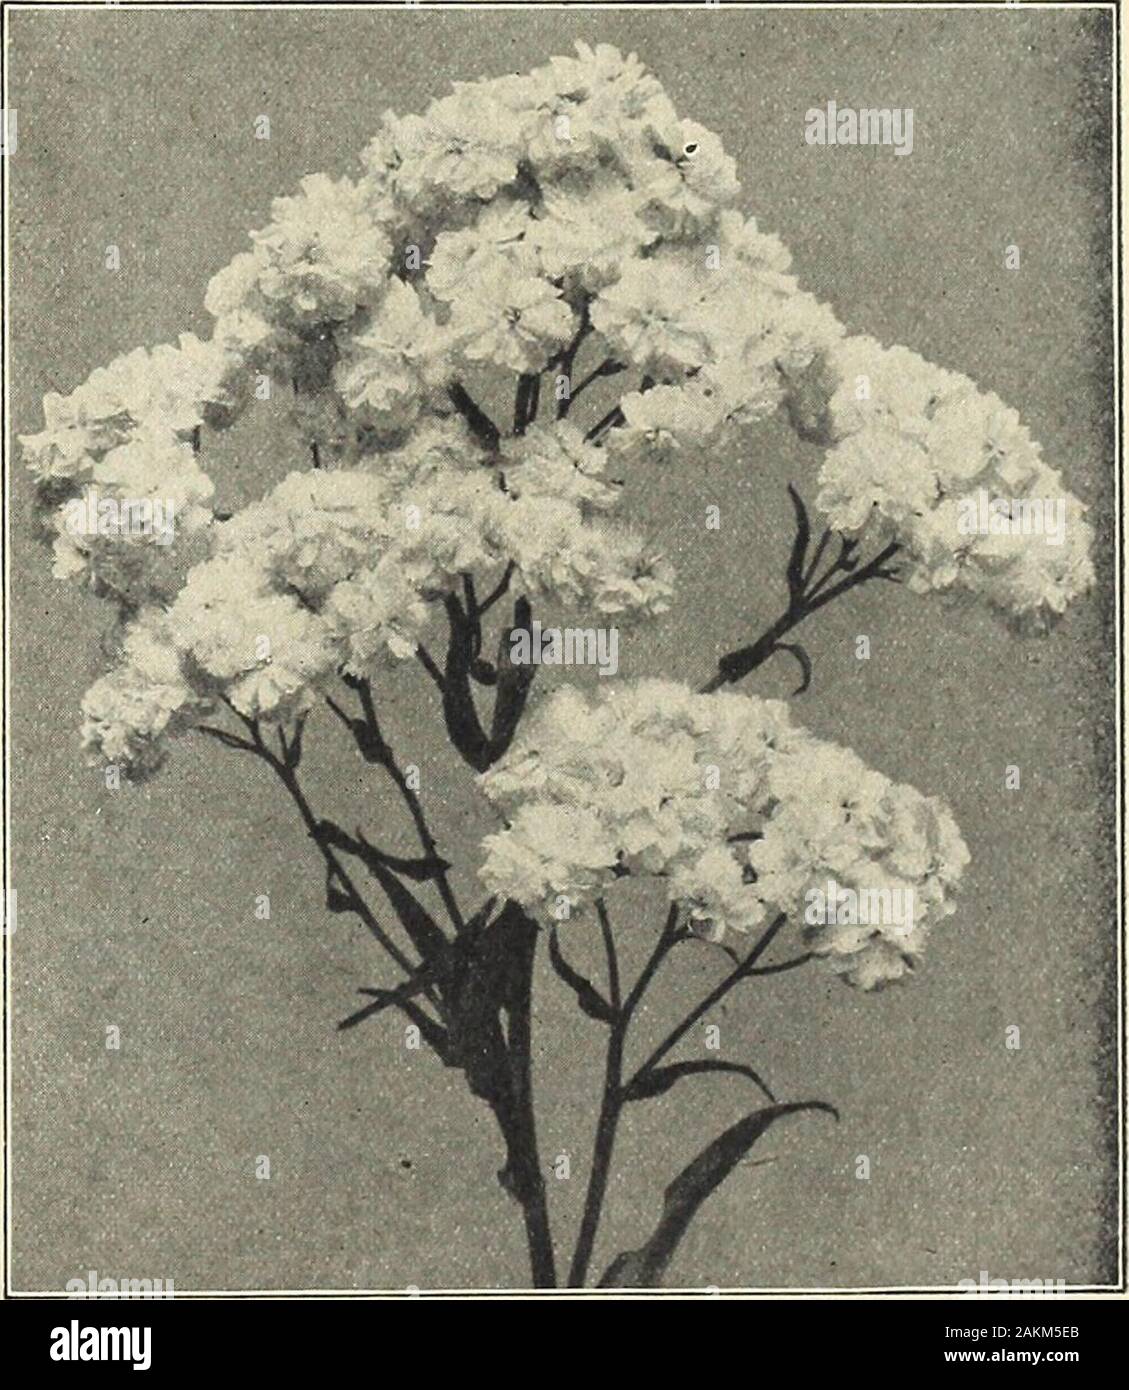 Farquhar's garden annual : 1918 . NEW and RAREPLANTS from CHINA. For varieties see pages 1-5of this catalogue. Achillea ptarmica. Perrys White. Aconitum Wilsoni. ACONITUM. Monkshood or Helmet Flower Autumnale. Large spikes of dark blue flowers; valuable for shady places;July to September. 3 ft. ... ... ... • - - - - • ? ? A Fischeri. A dwarf variety with very large pale blue flowers; September and October. 2 ft ... Napellus. Dark blue; August and September. 3 ft. Napellus bicolor. Blue and white Sparks Variety. Deep blue flowers and branching habit. July 4 ft.Wilsoni. Light violet-blue flowers Stock Photo